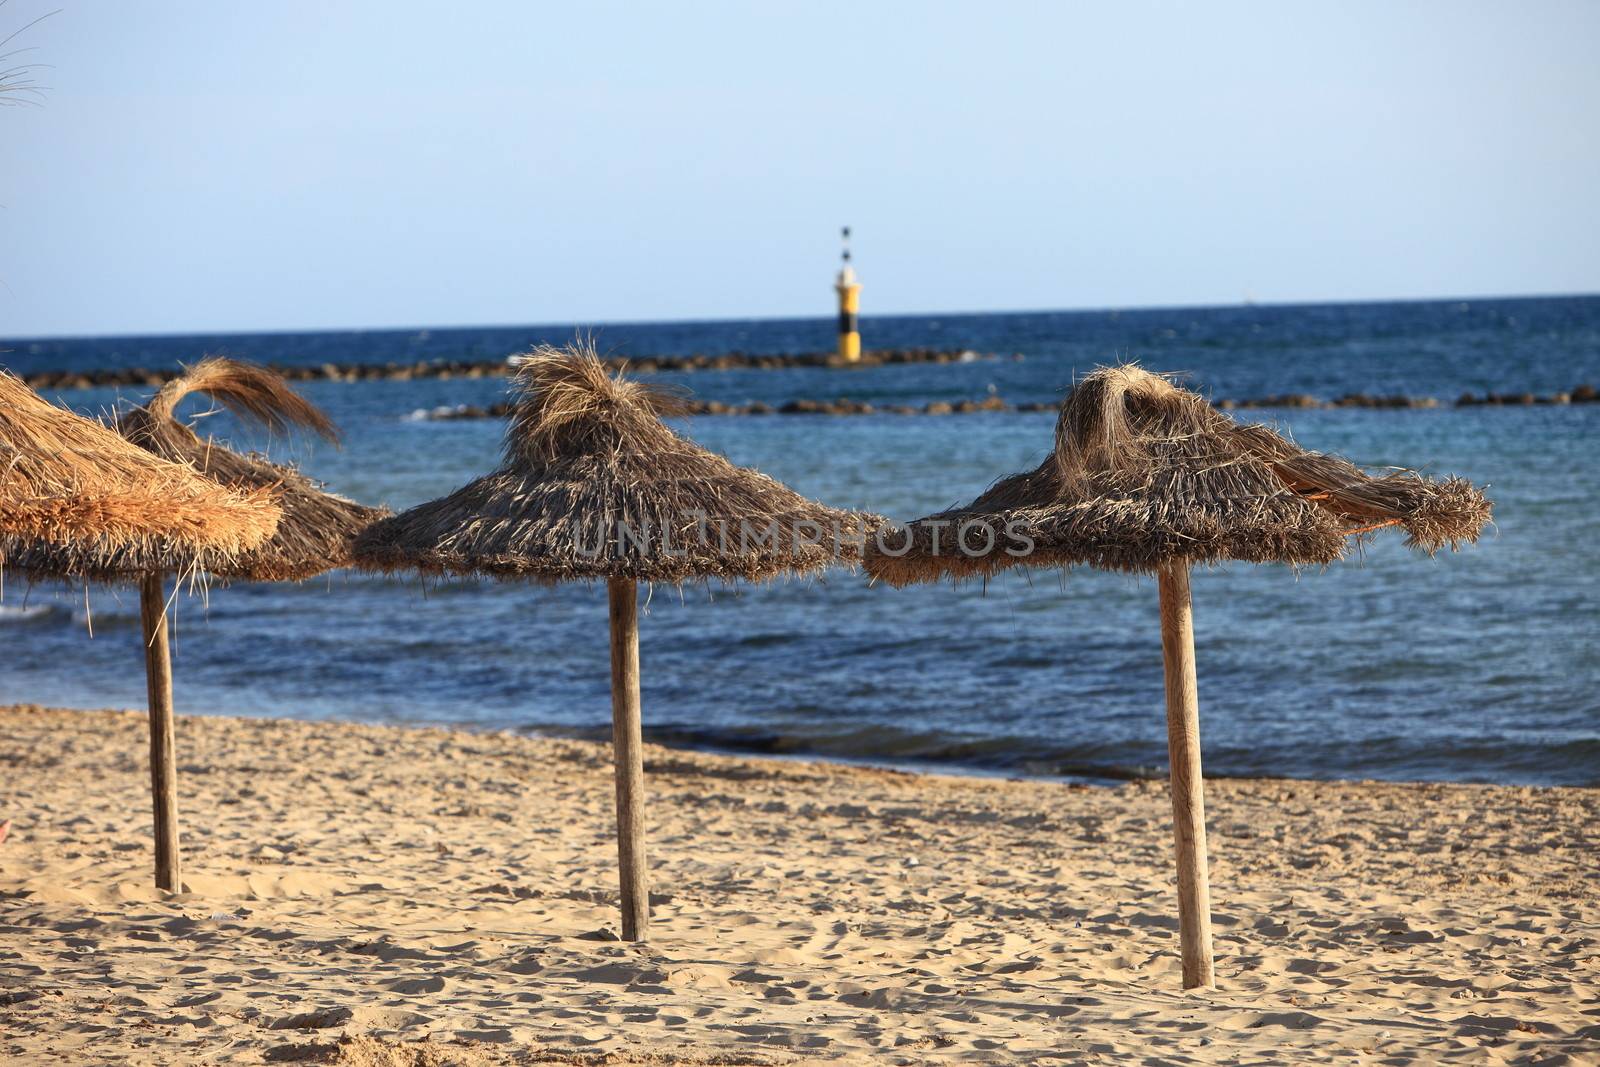 Thatched umbrellas on a tropical beach by Farina6000